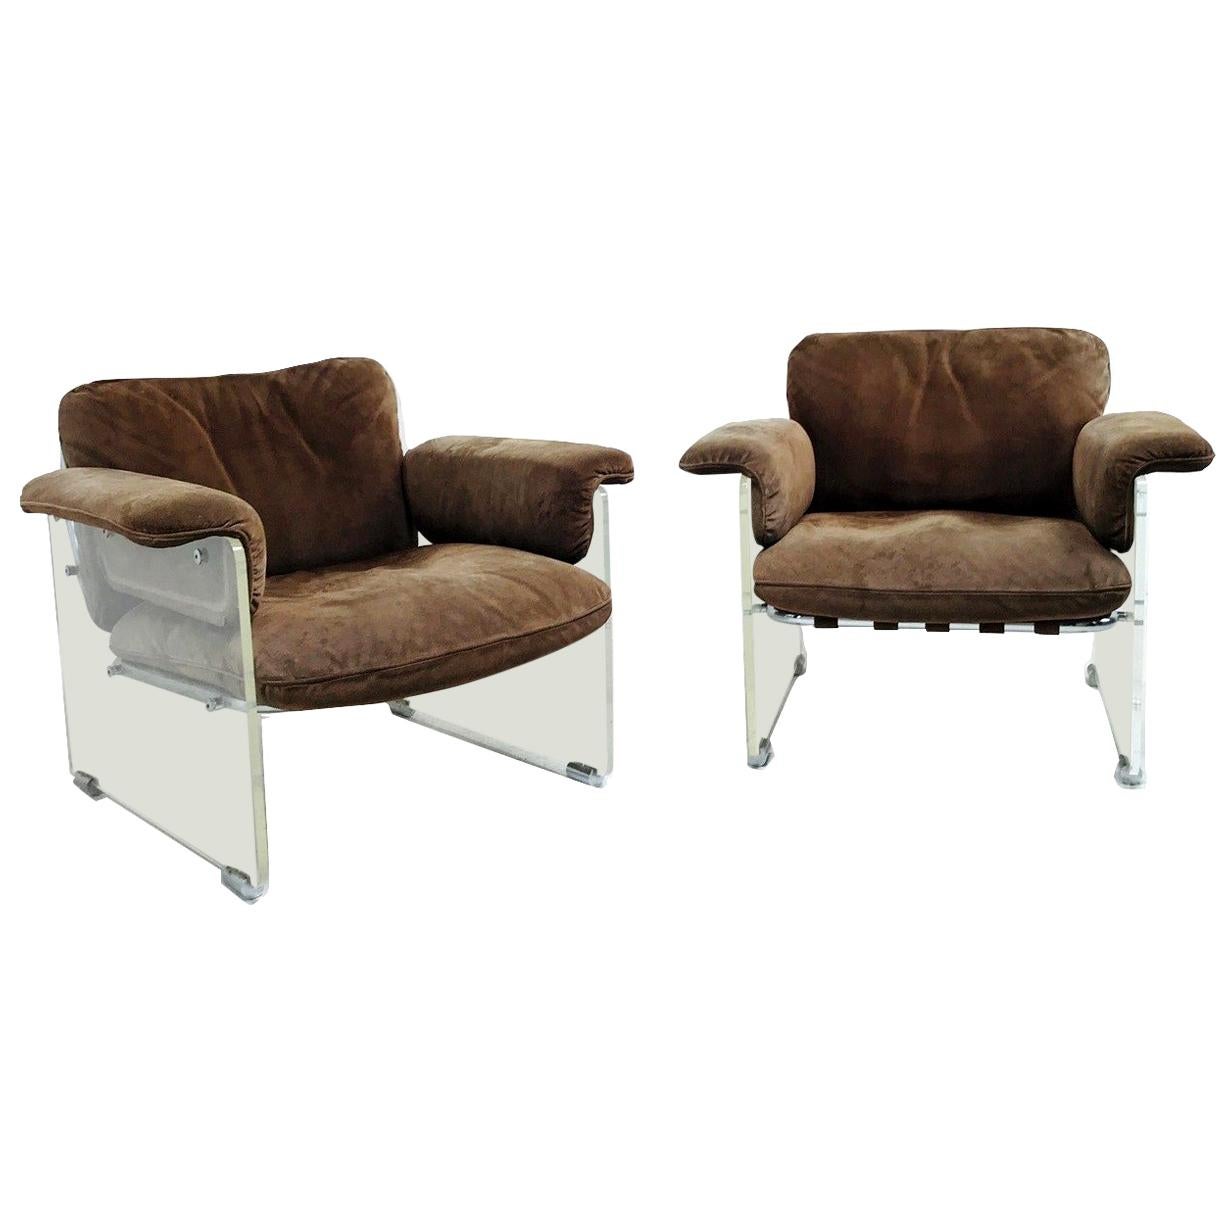 Pair of Brown Suede Pace Chairs with Lucite Arms